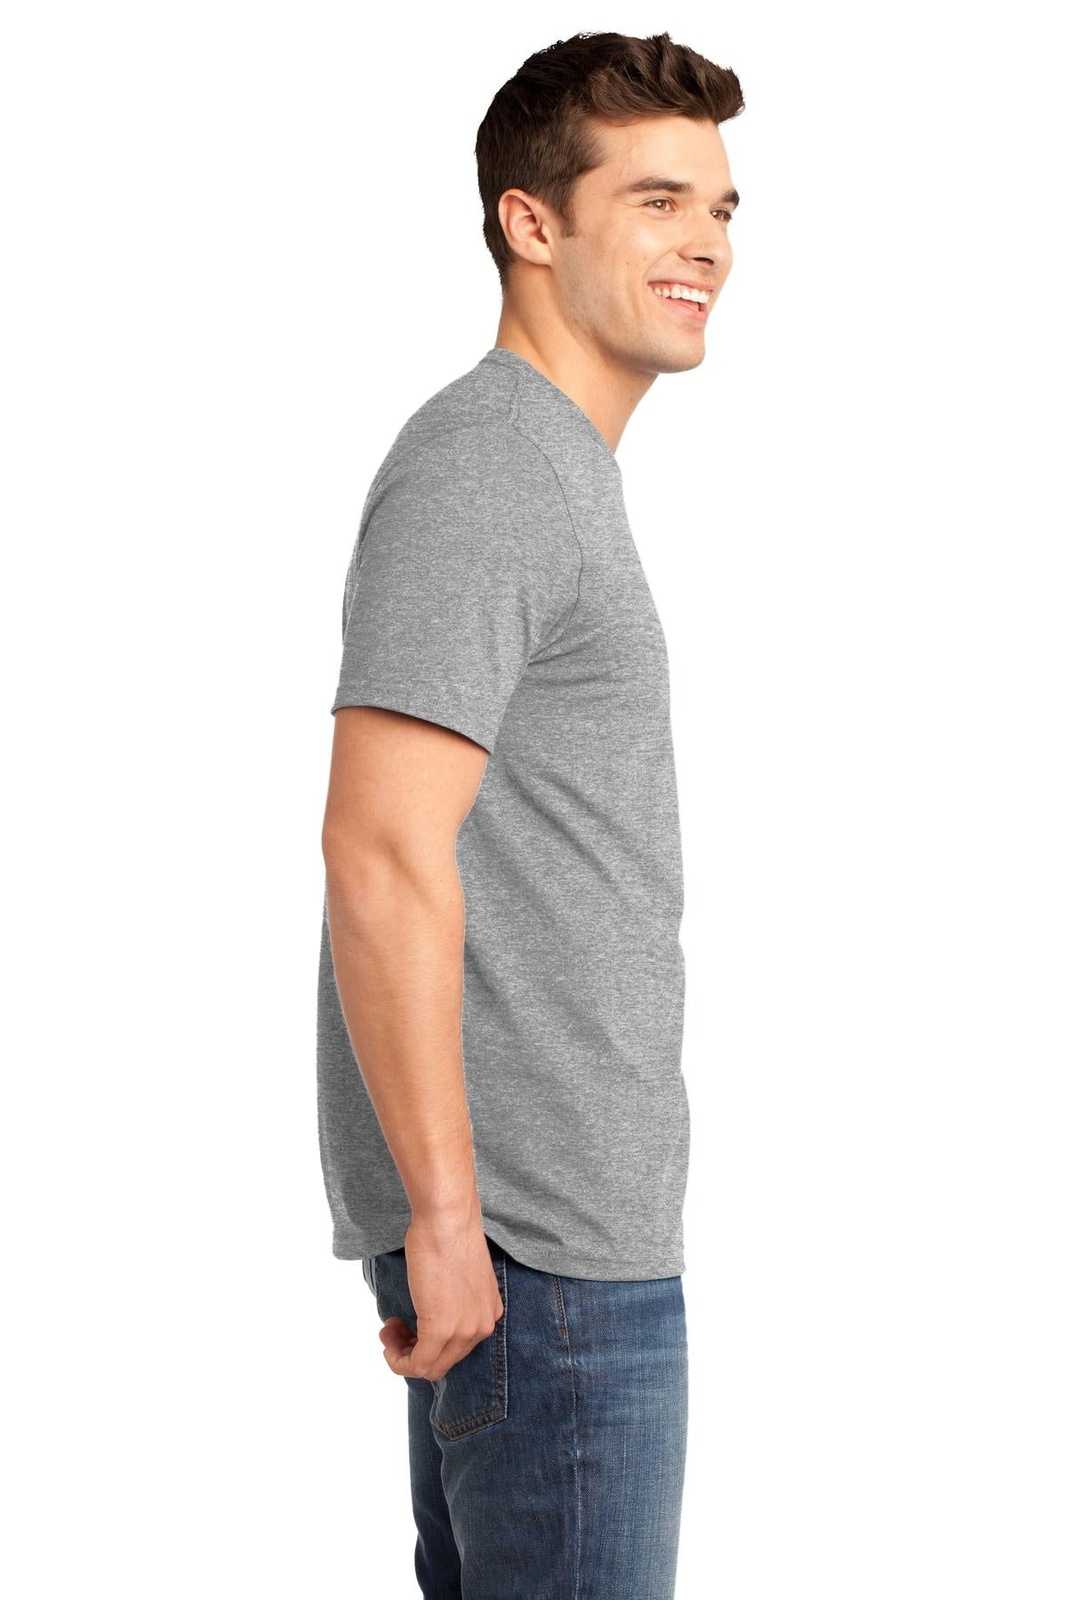 District DT6000 Very Important Tee - Light Heather Gray - HIT a Double - 3